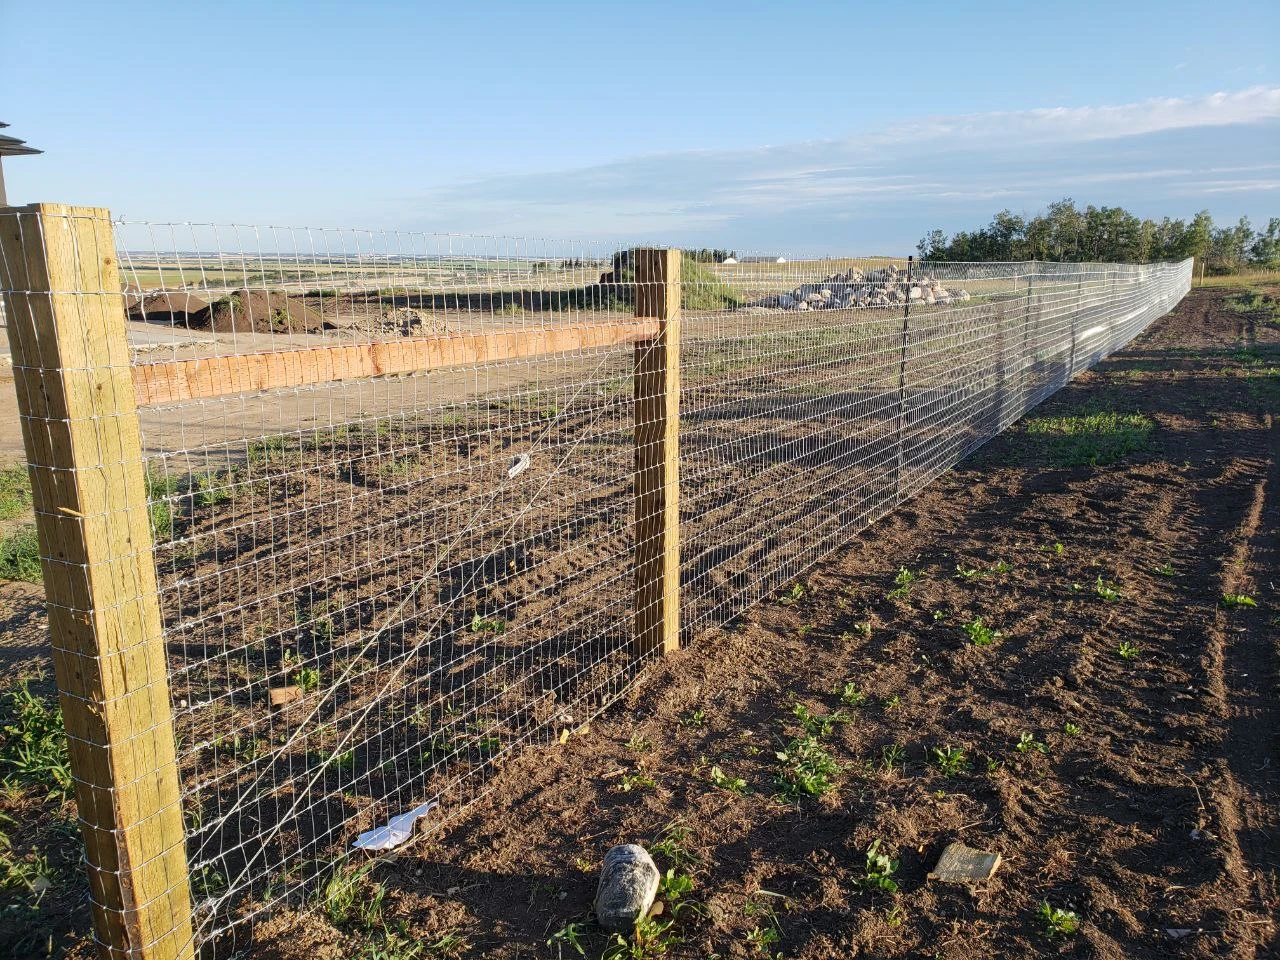 Do You Need Quality Fencing? Check Out Our Fencing Services